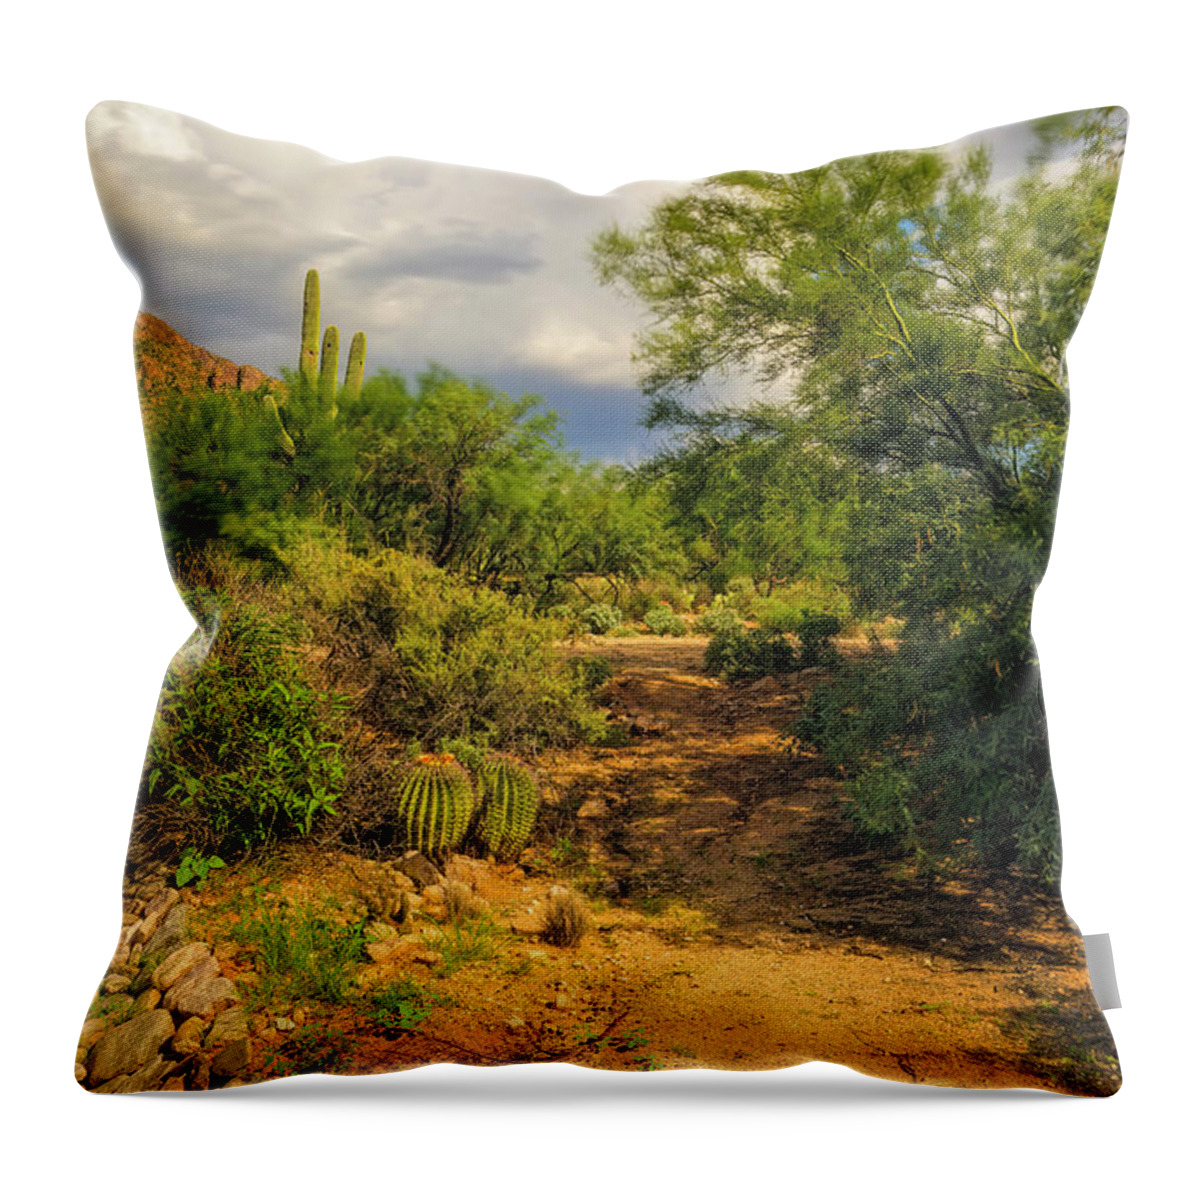 Floral Throw Pillow featuring the photograph Caminata En Sonora 24828 by Mark Myhaver